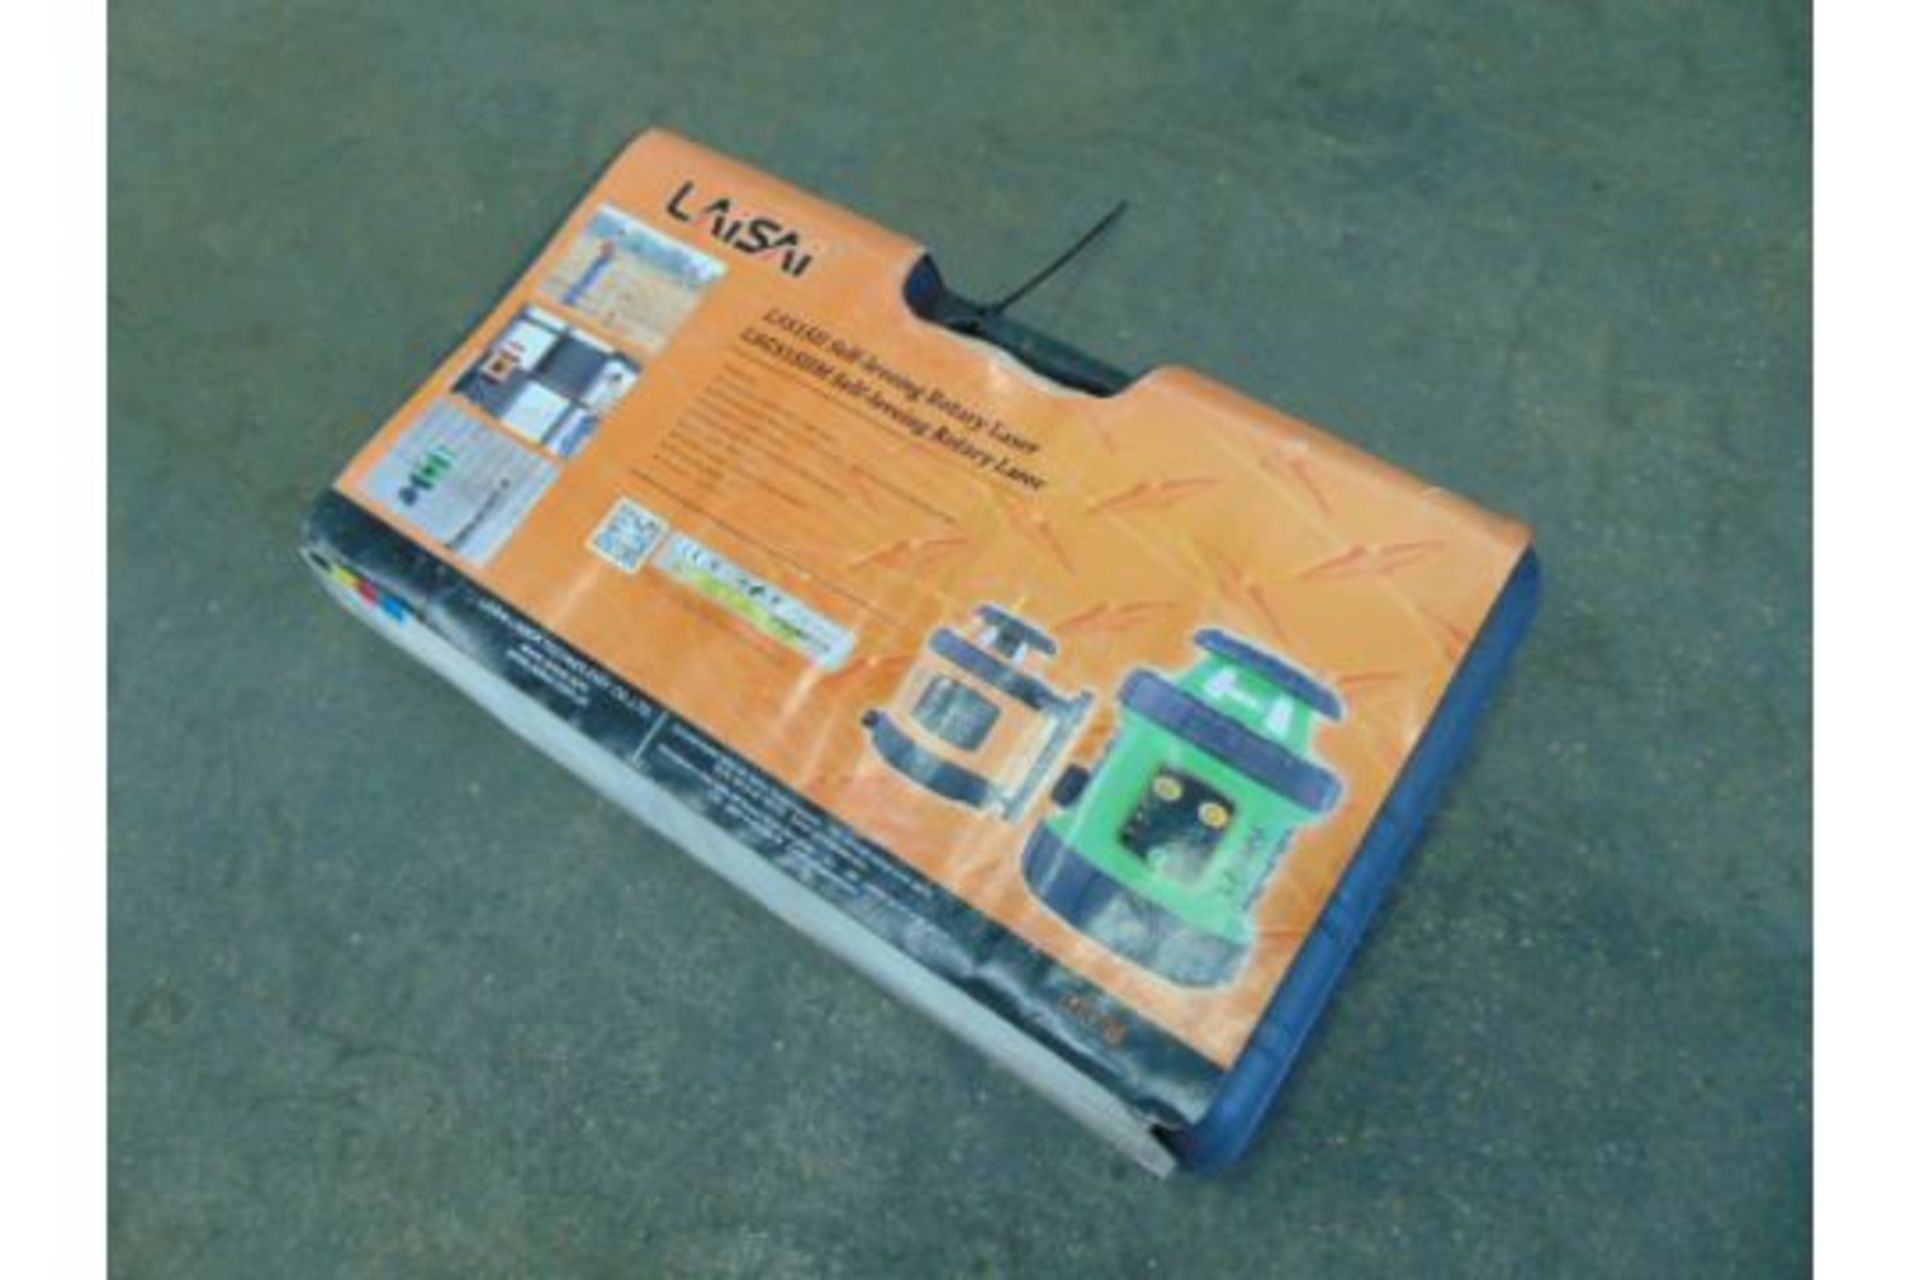 ** BRAND NEW ** LAISAI LS515II Surveying Self Levelling Rotary Laser Set - Image 11 of 11